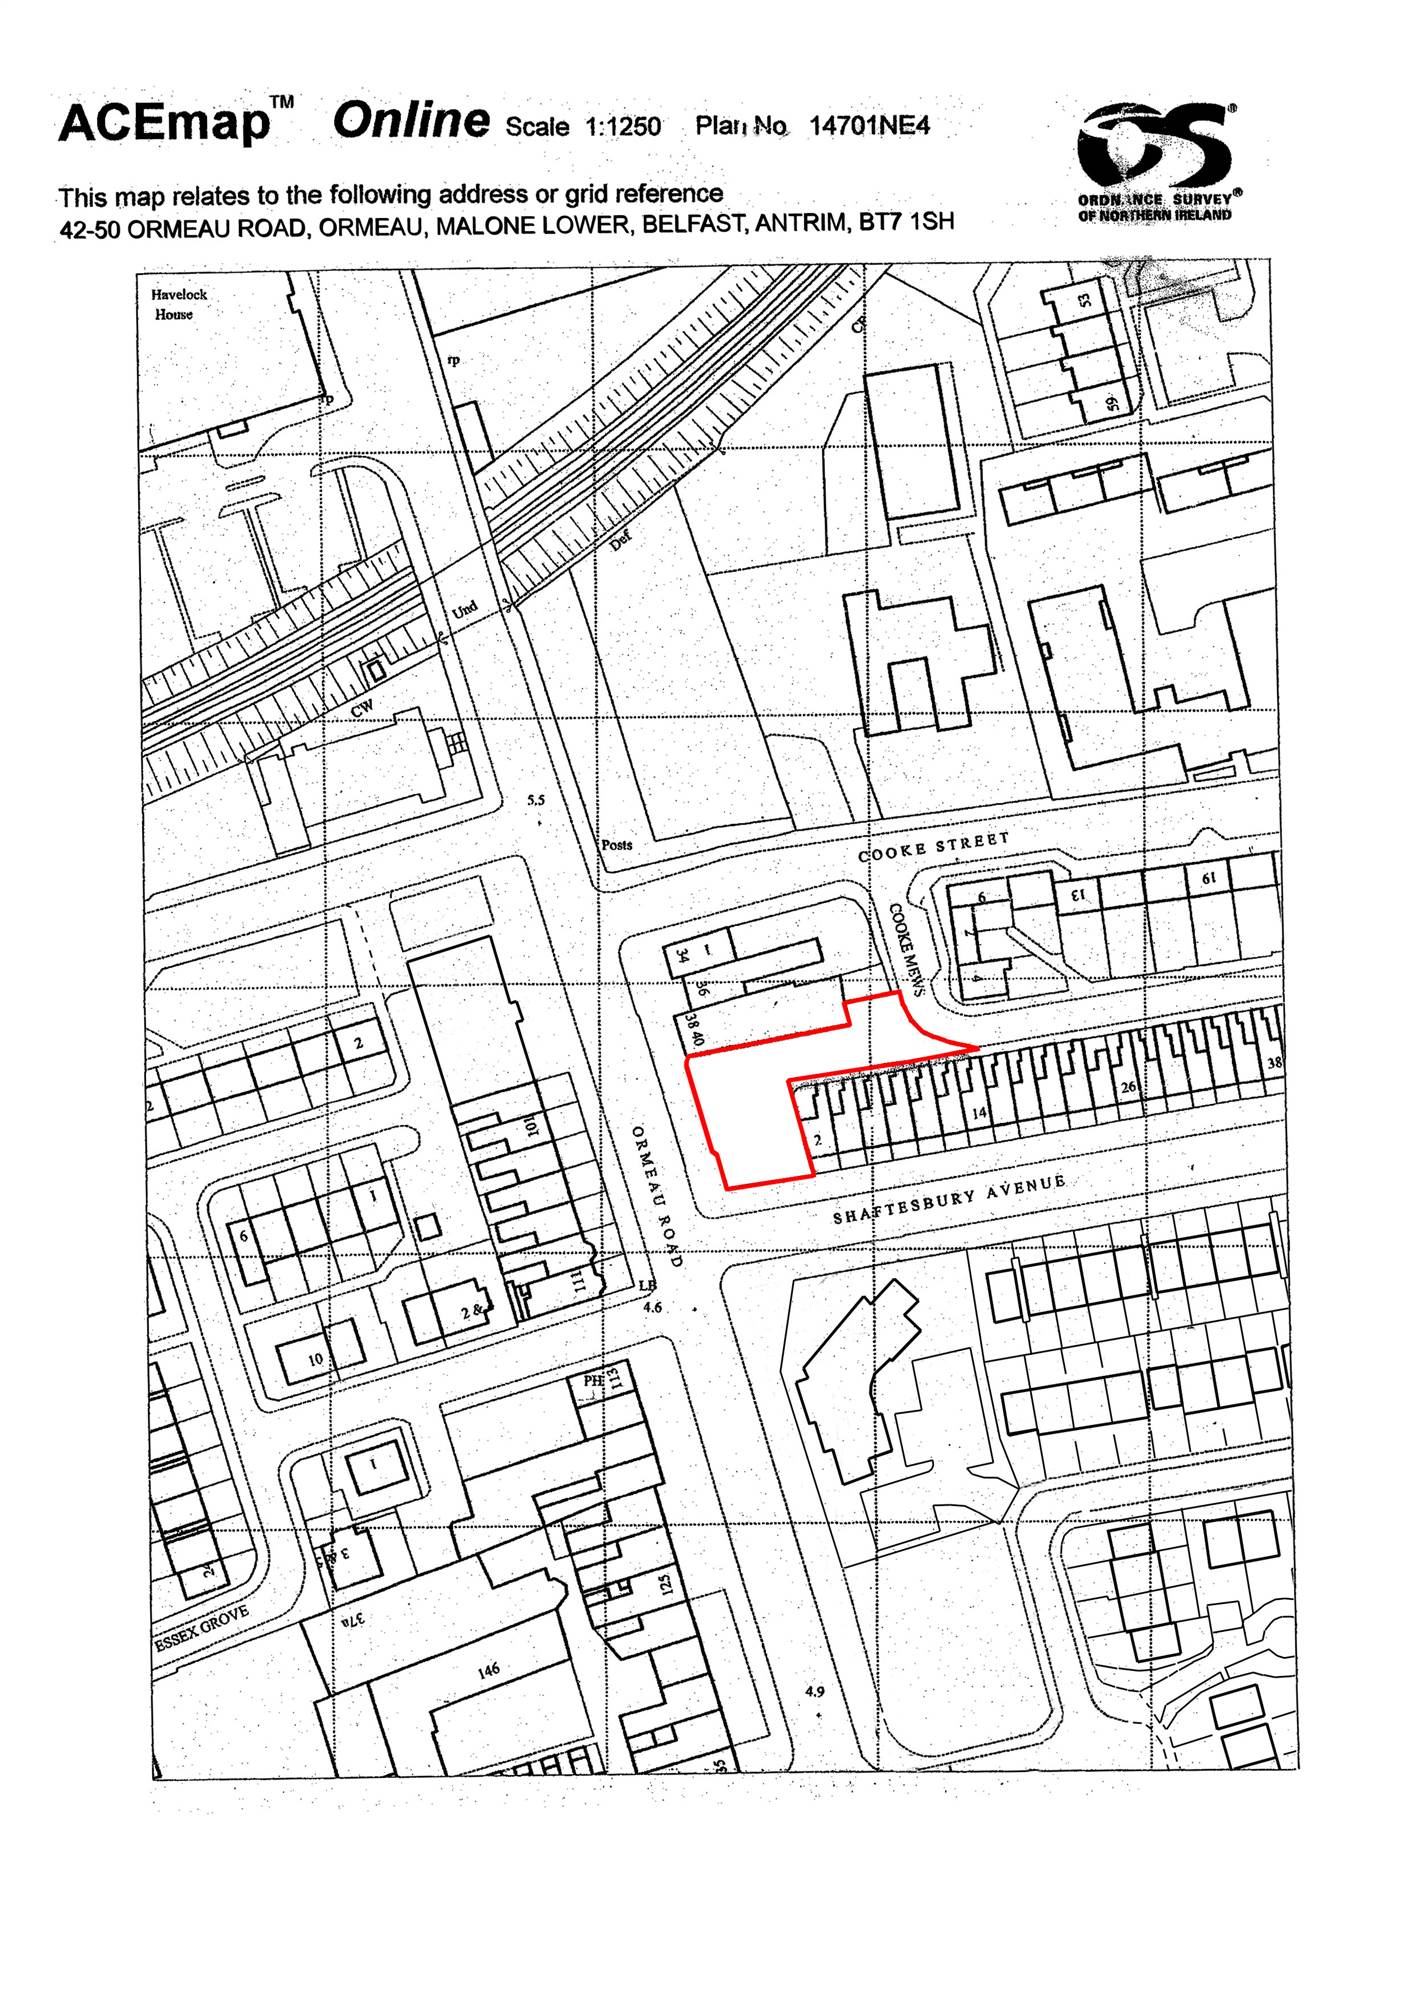 Site at 42-50 Ormeau Road